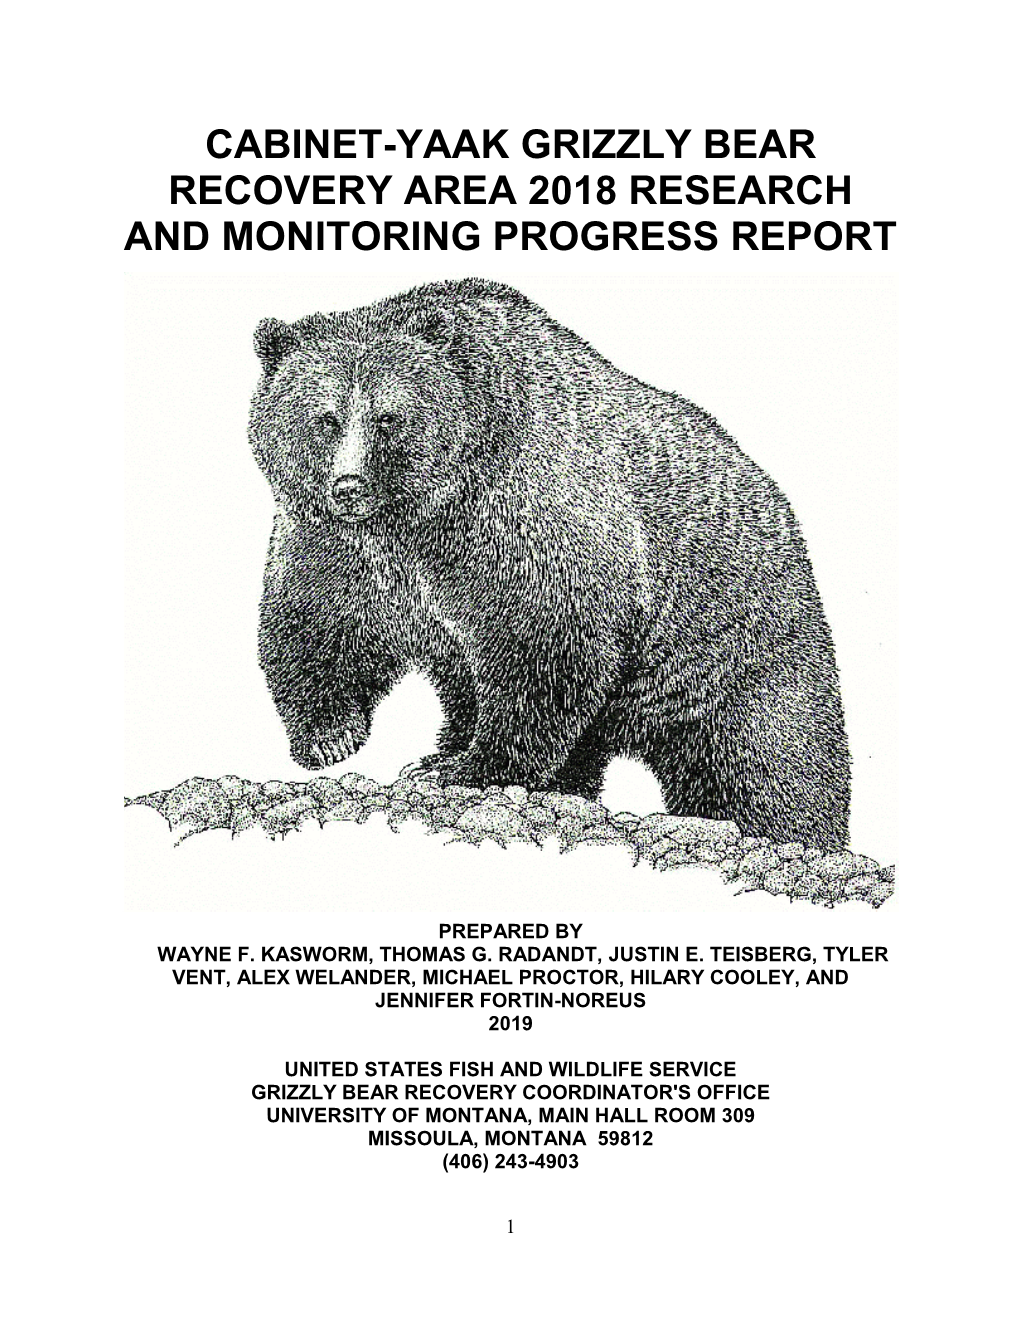 Cabinet-Yaak Grizzly Bear Recovery Area 2018 Research and Monitoring Progress Report